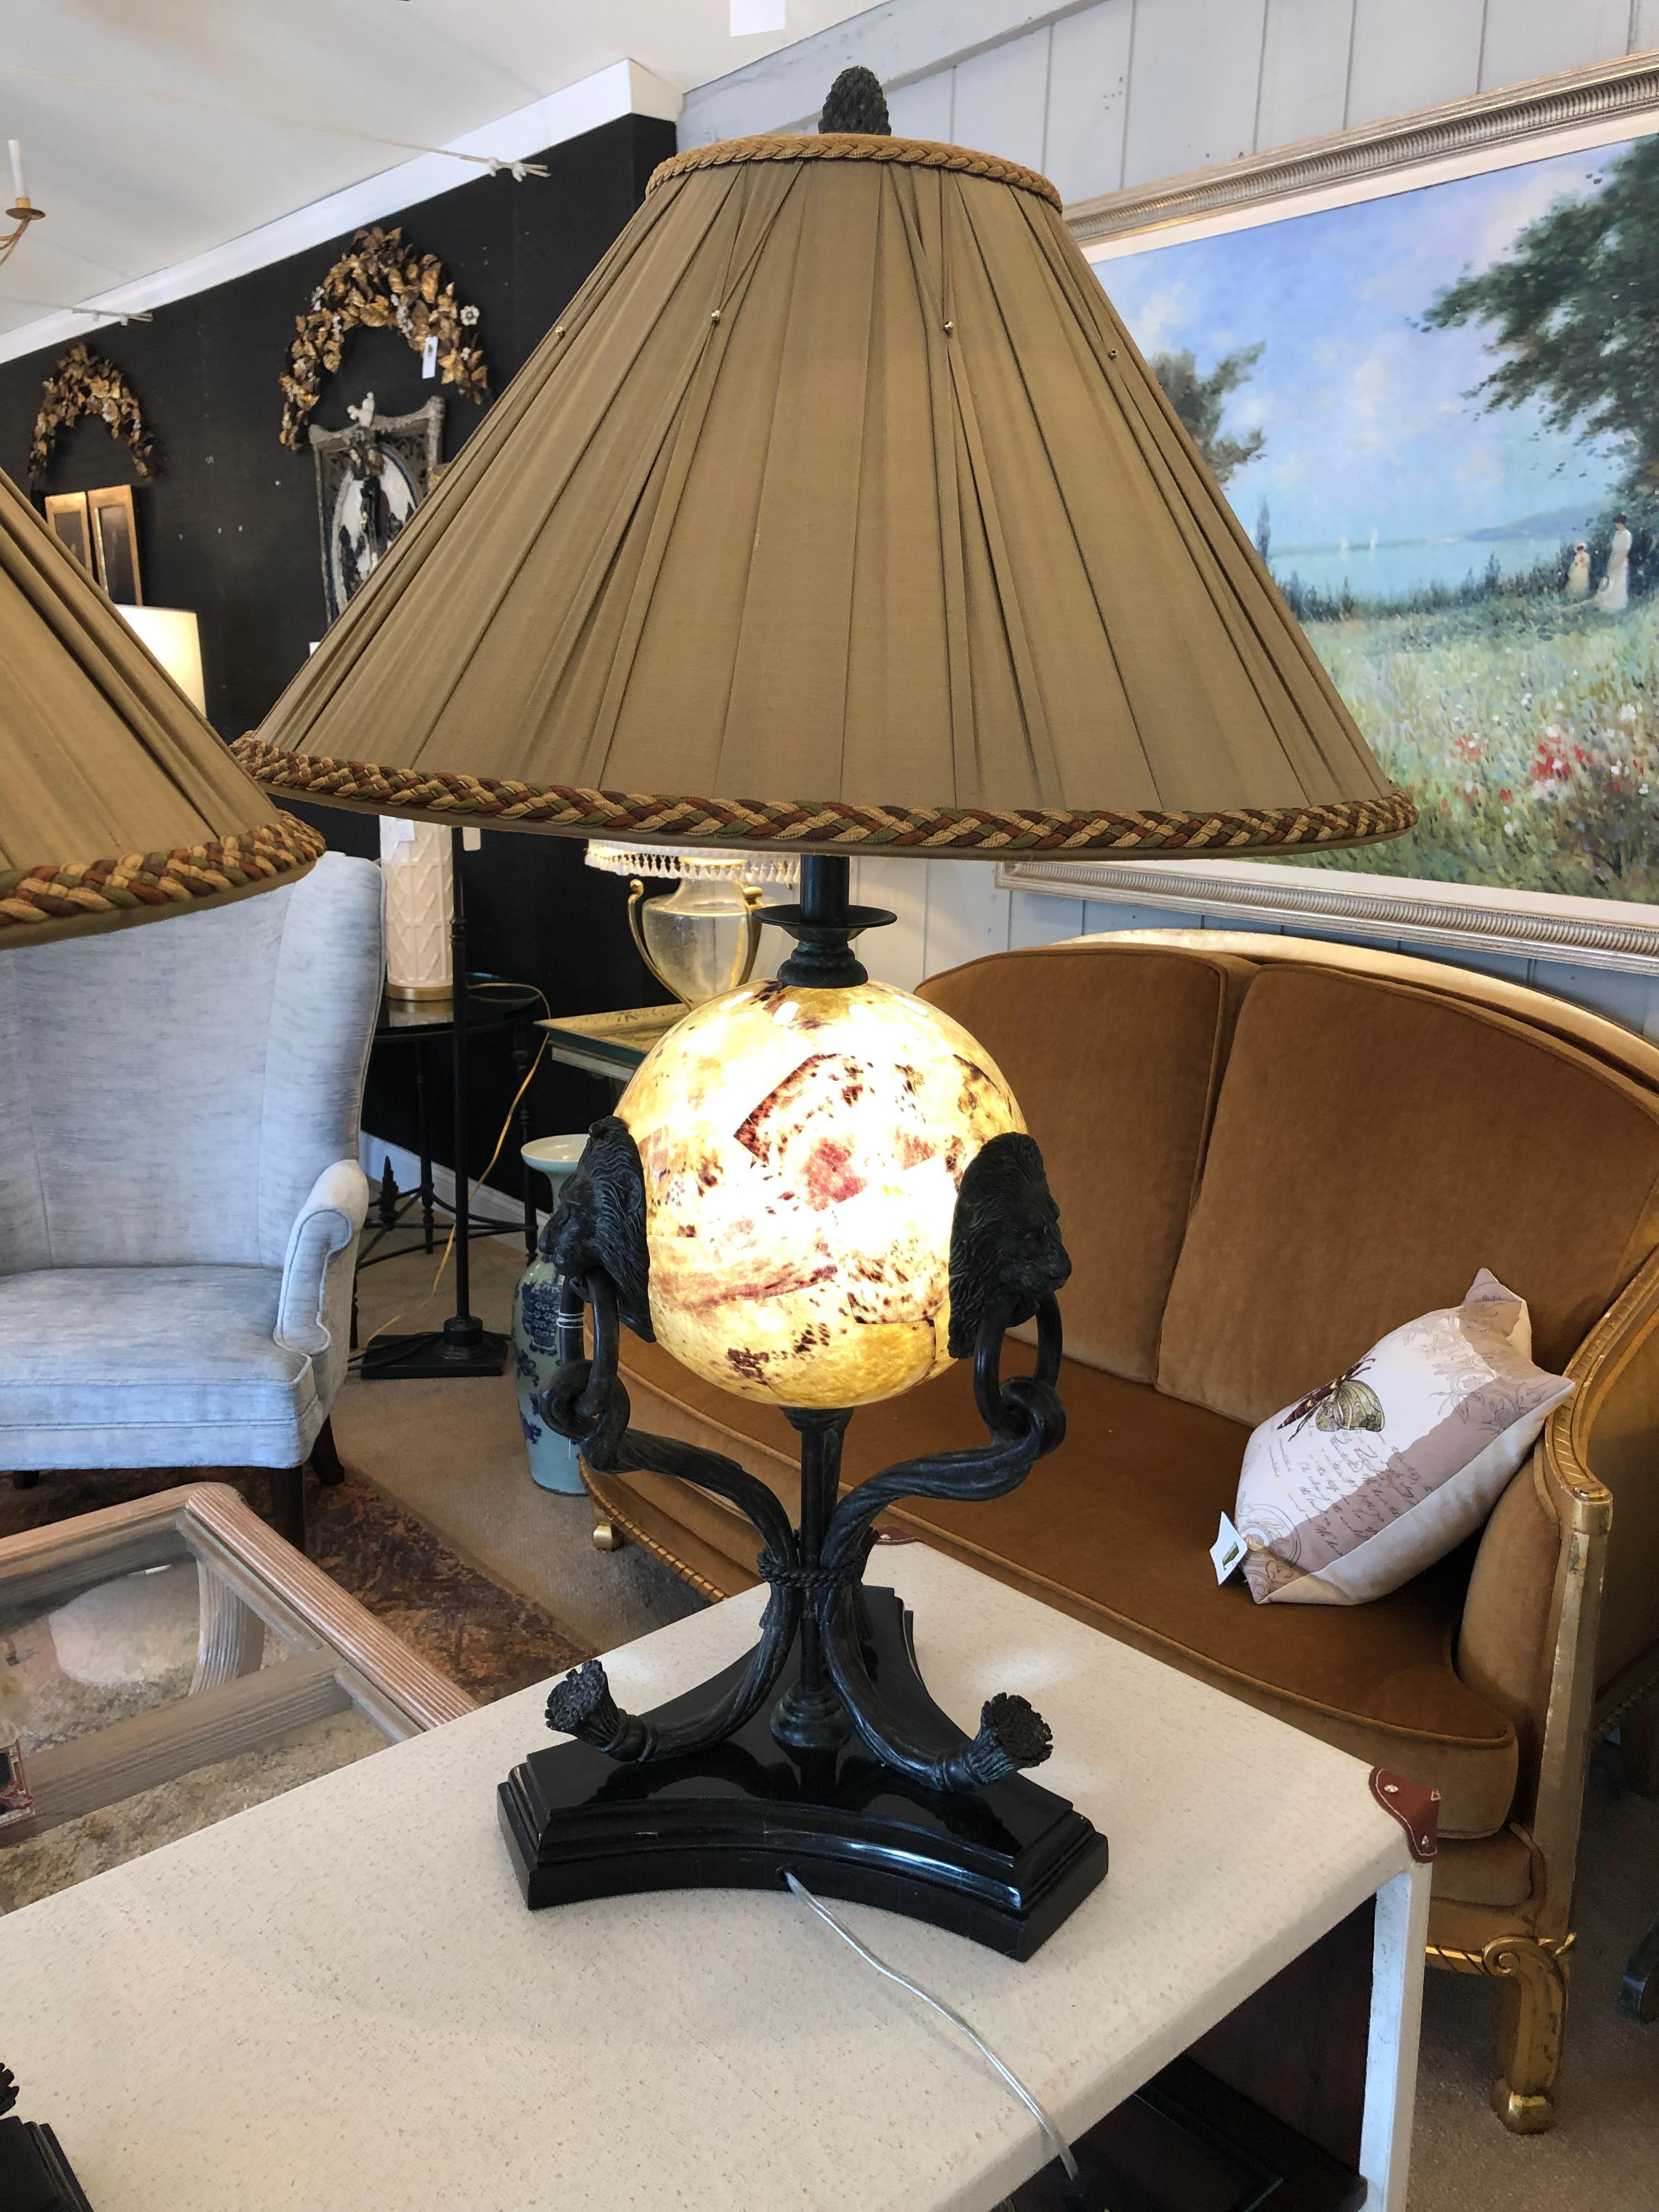 Impressive ornate pair of very fancy table lamps having shell orbs that are an additional source of light with a primary single socket above.  Bronze lions with rings in their mouths adorn the spheres and the bases have elaborate tripod shapes on